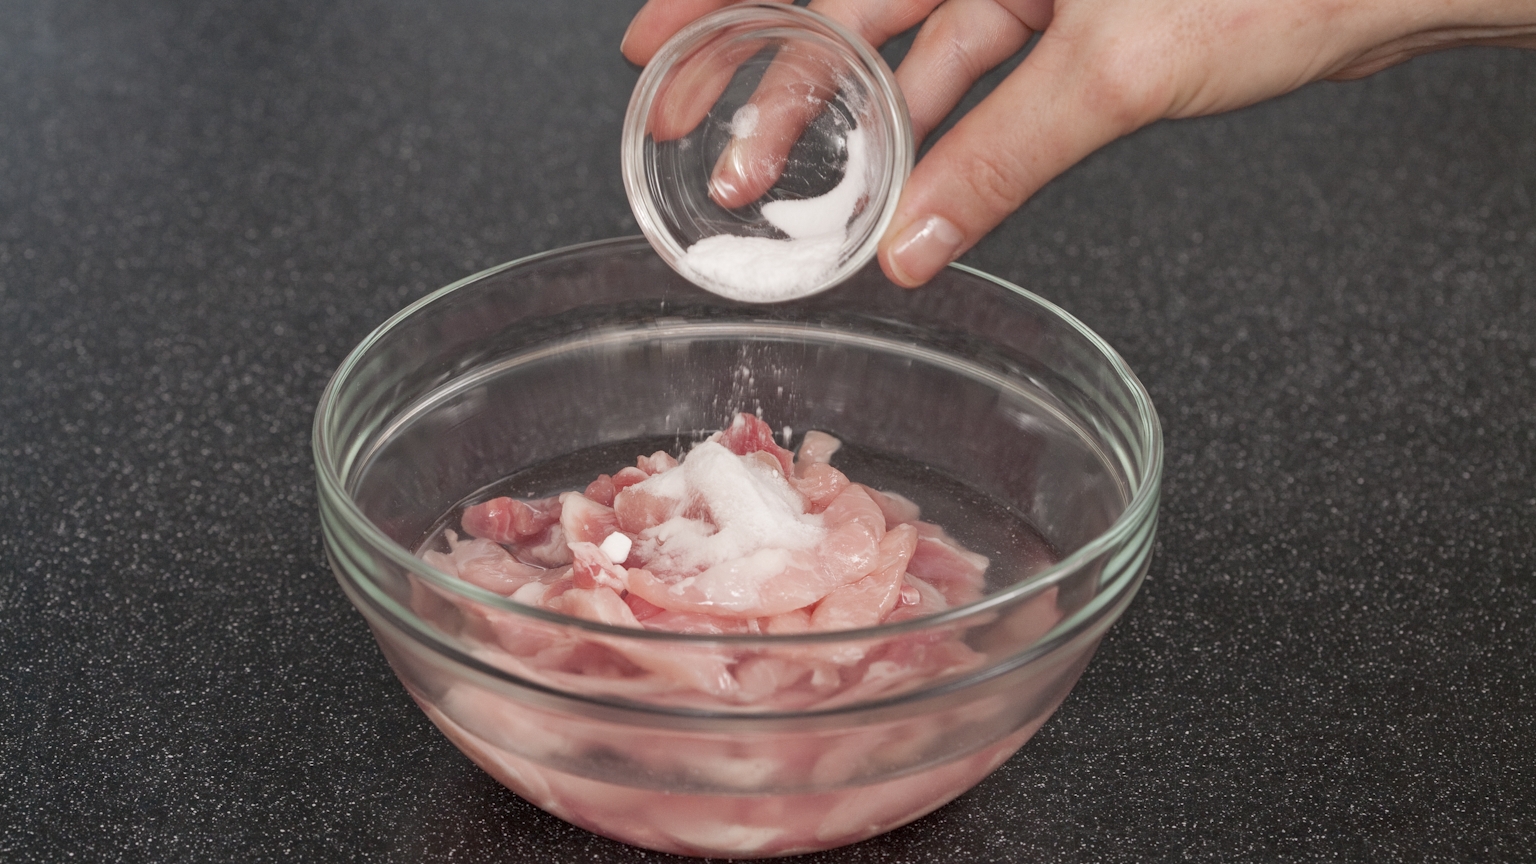 Tenderizing Meat with a Baking Soda Solution | Cook's Illustrated